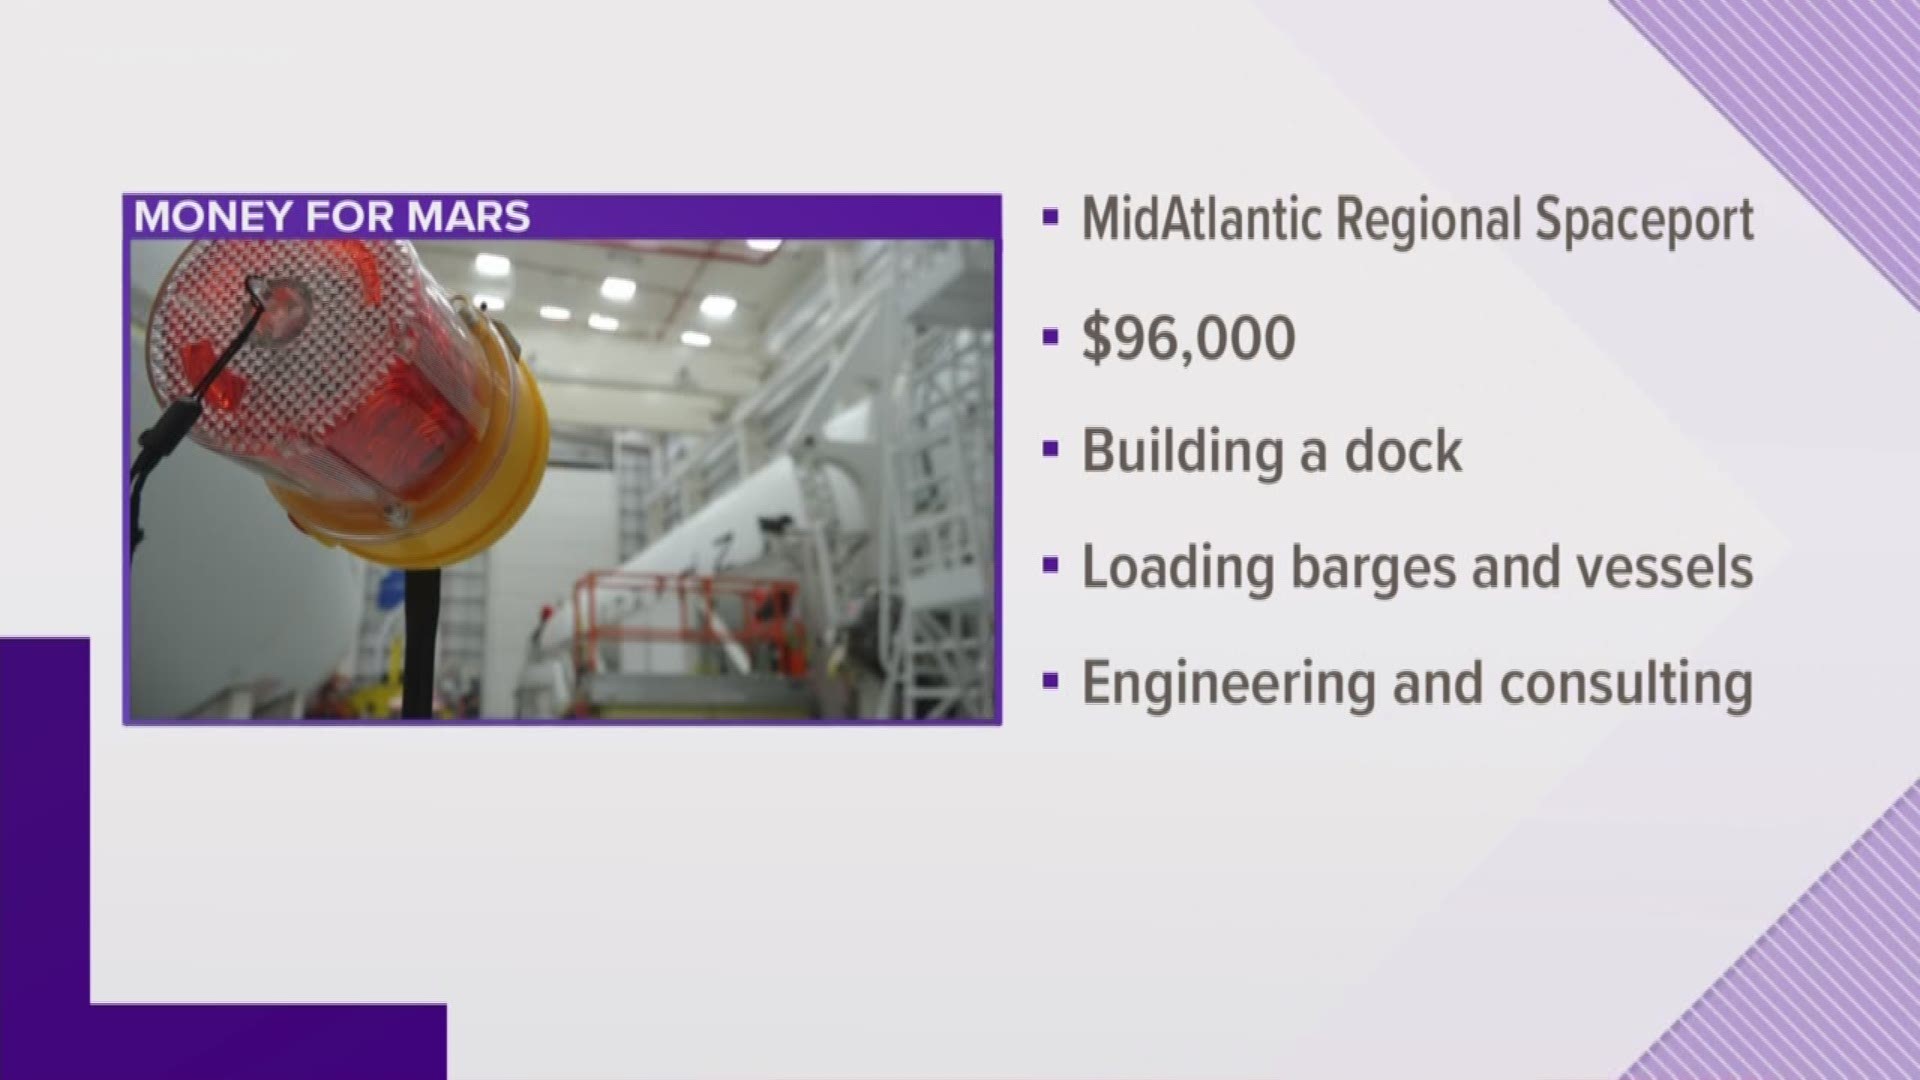 It's a big payday for the Mid-Atlantic Spaceport in Wallops Island. The money is going toward building a large dock.